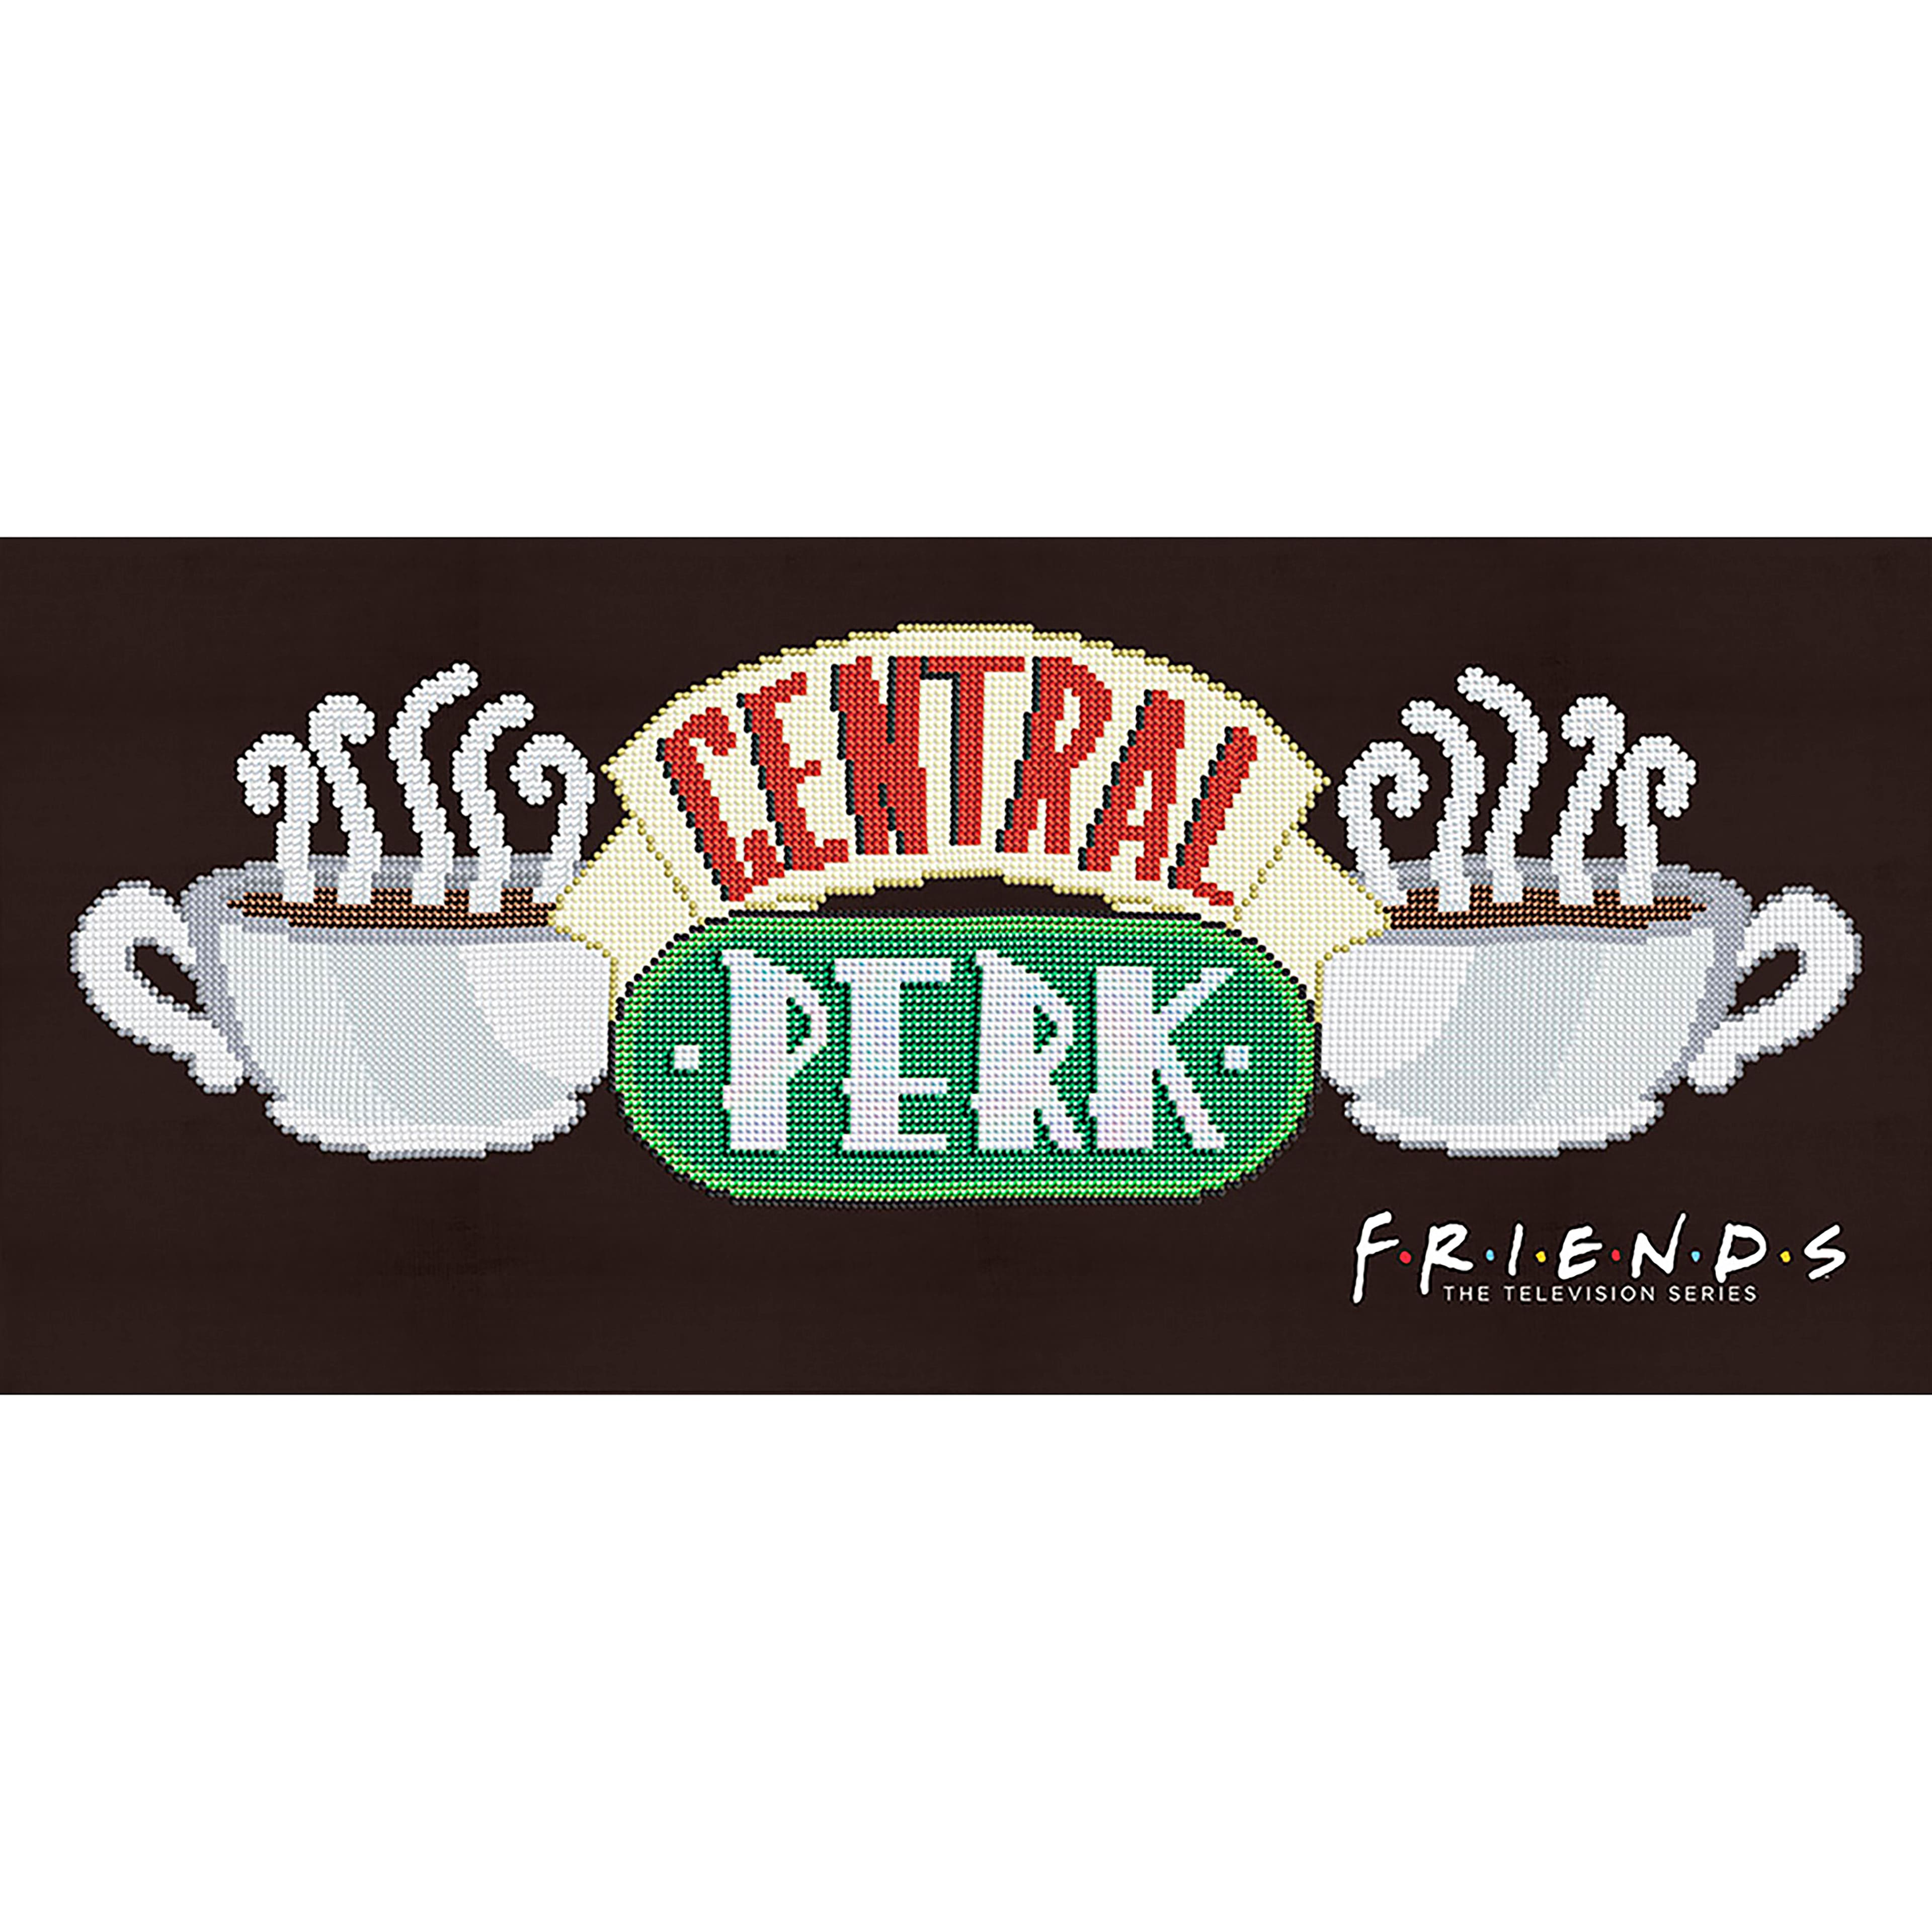 5D Diamond Painting Friends Central Perk Couch Kit